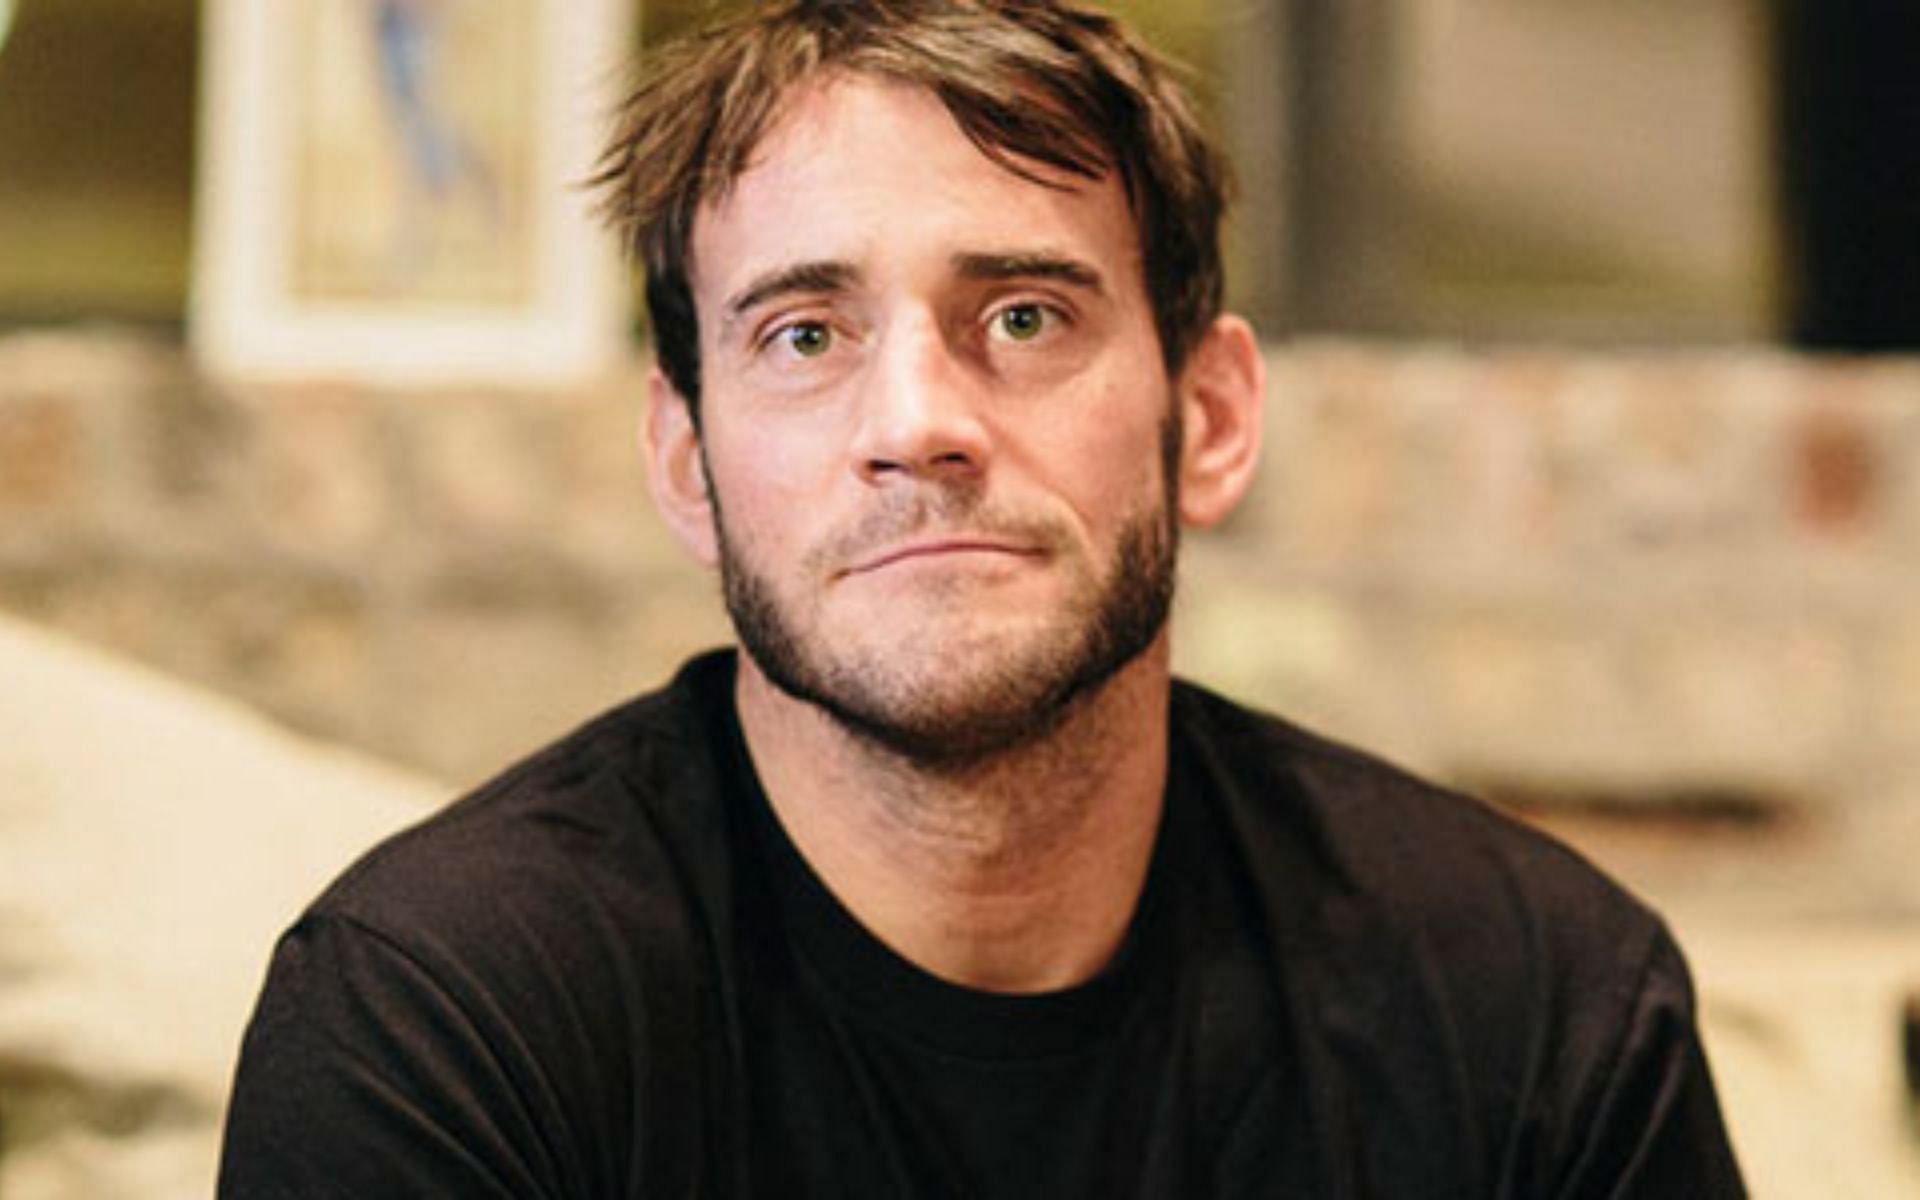 CM Punk is seemingly done with his wrestling career basis reports